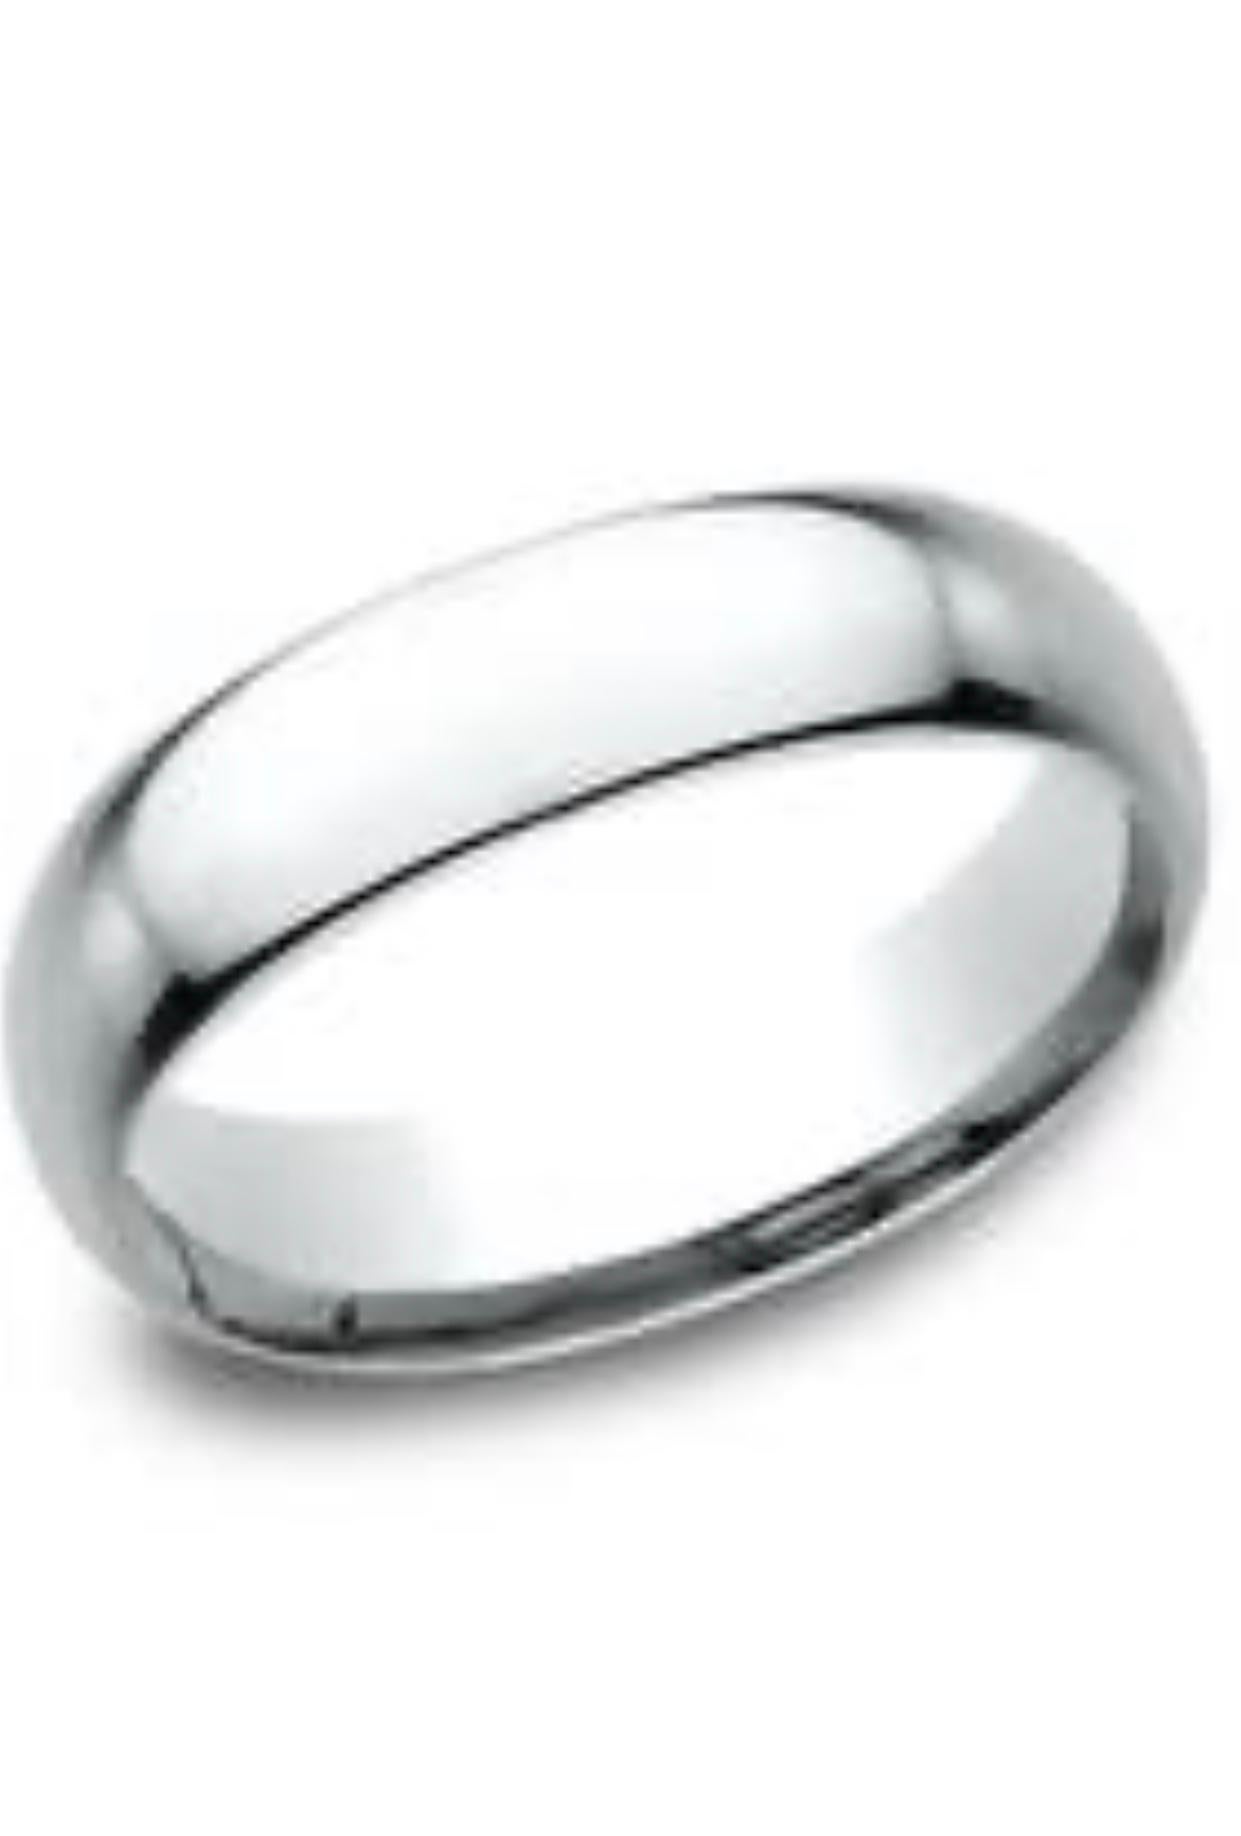 Platinum Wide Plain Wedding Band Ring 11 Grams, Estate Size 7.25
This men’s or unisex wedding band, crafted in Platinum , measures 4.25 mm in width and 2 mm thickness is a size 7.25 It weighs 8 grams.
This is a simple yet elegant wedding band . It